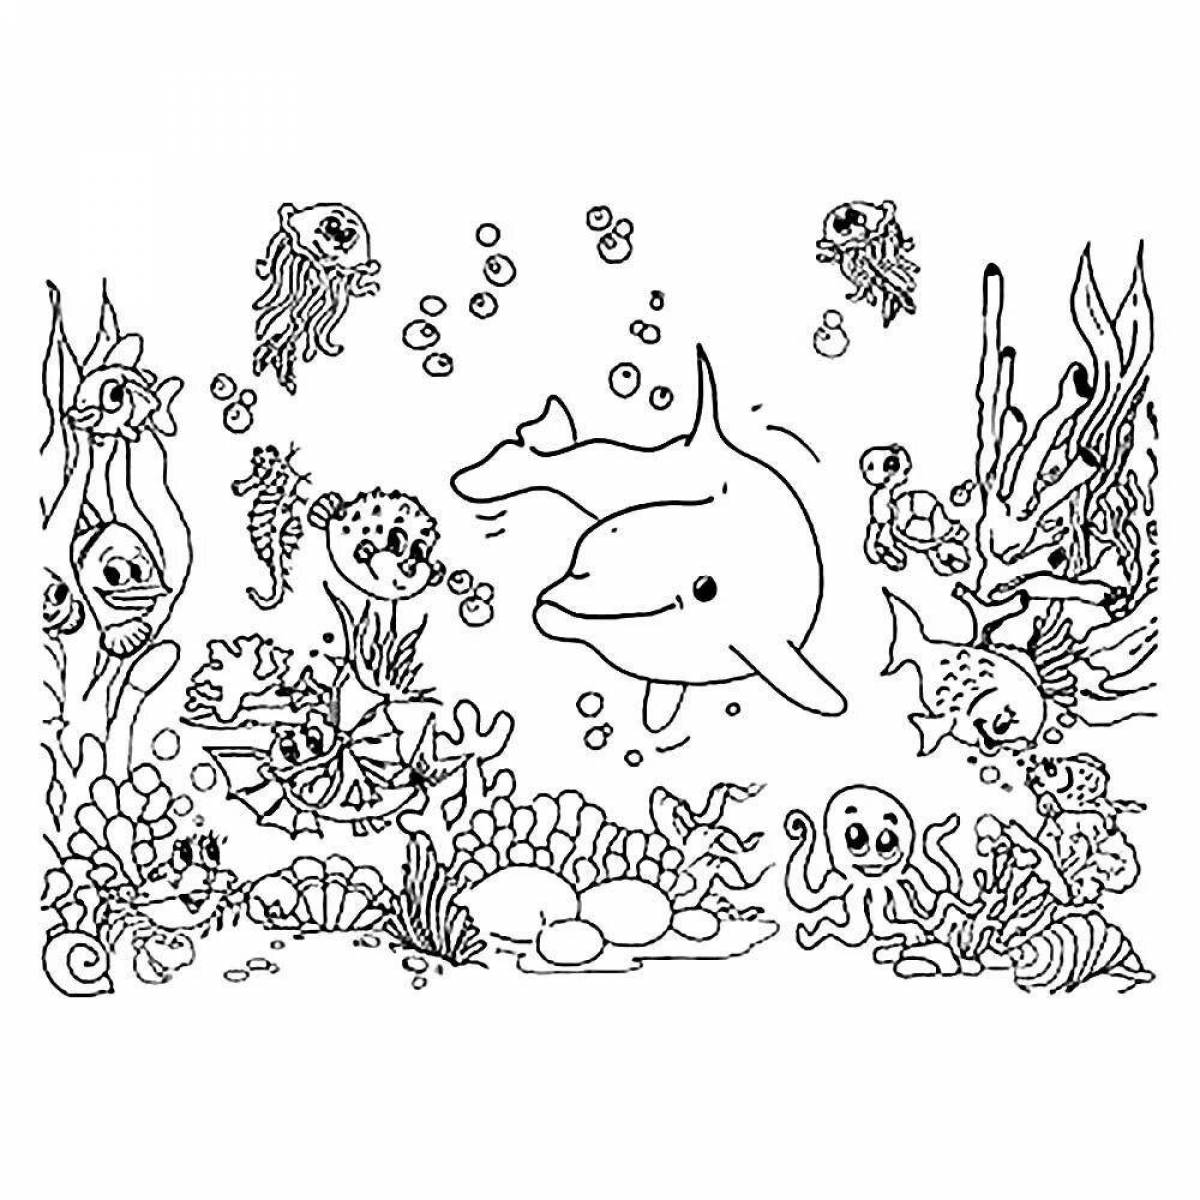 Great seabed coloring book for kids